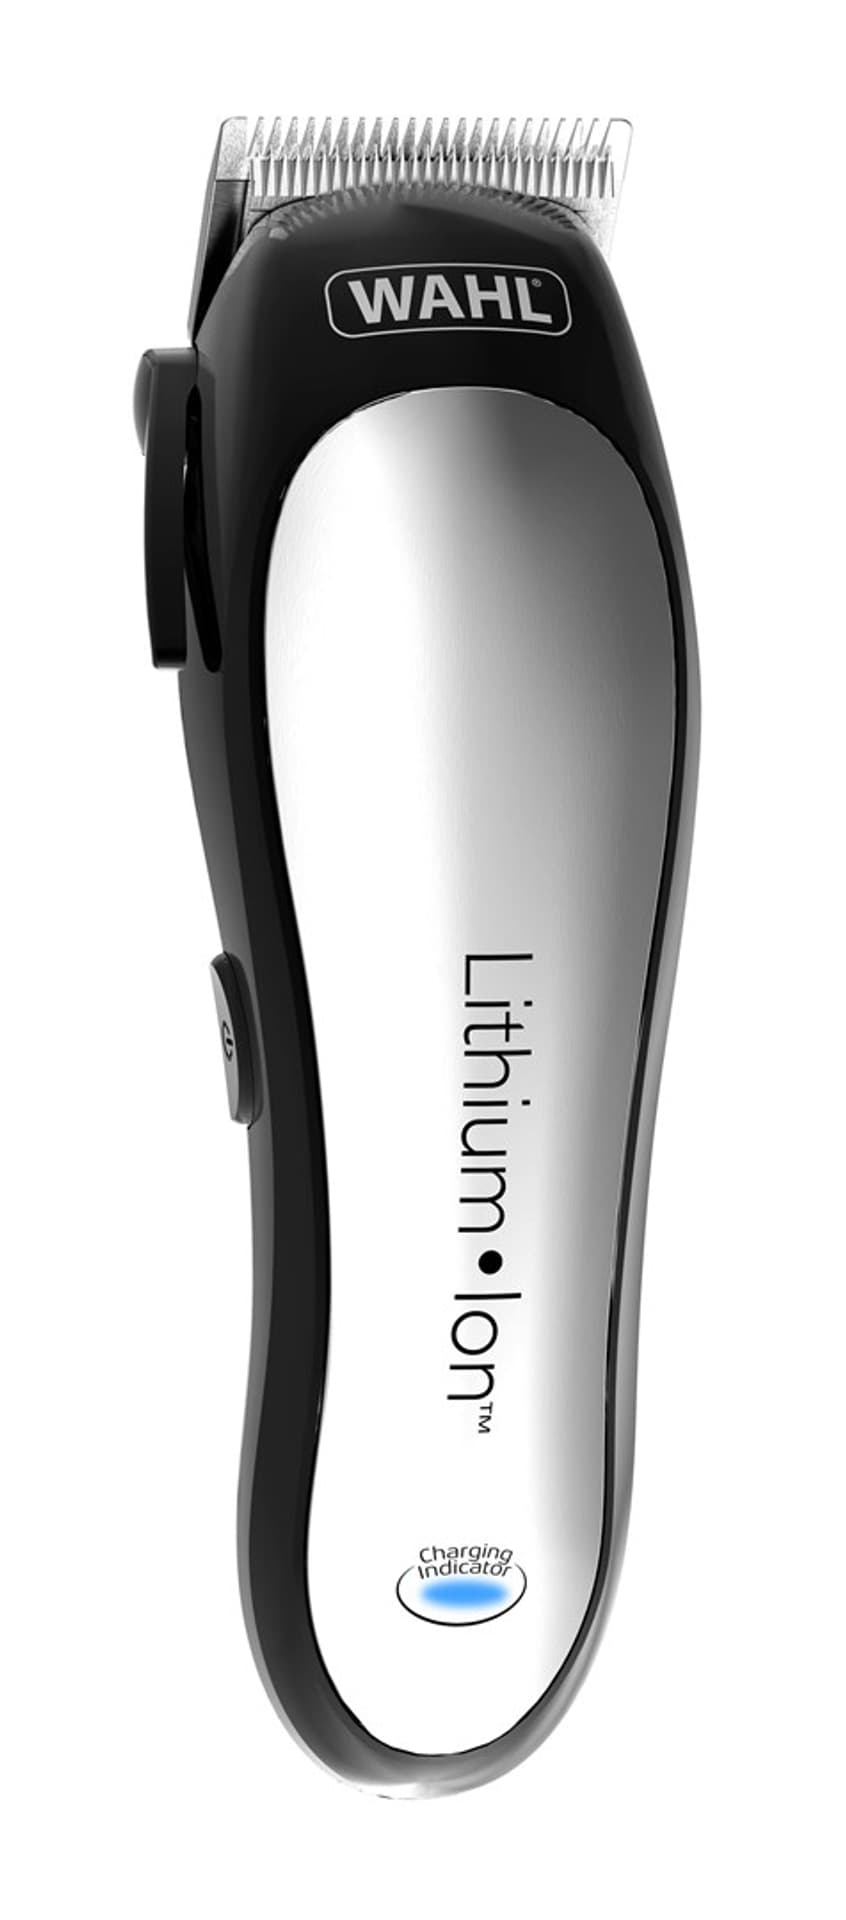 WAHL Lithium Ion 79600-5640